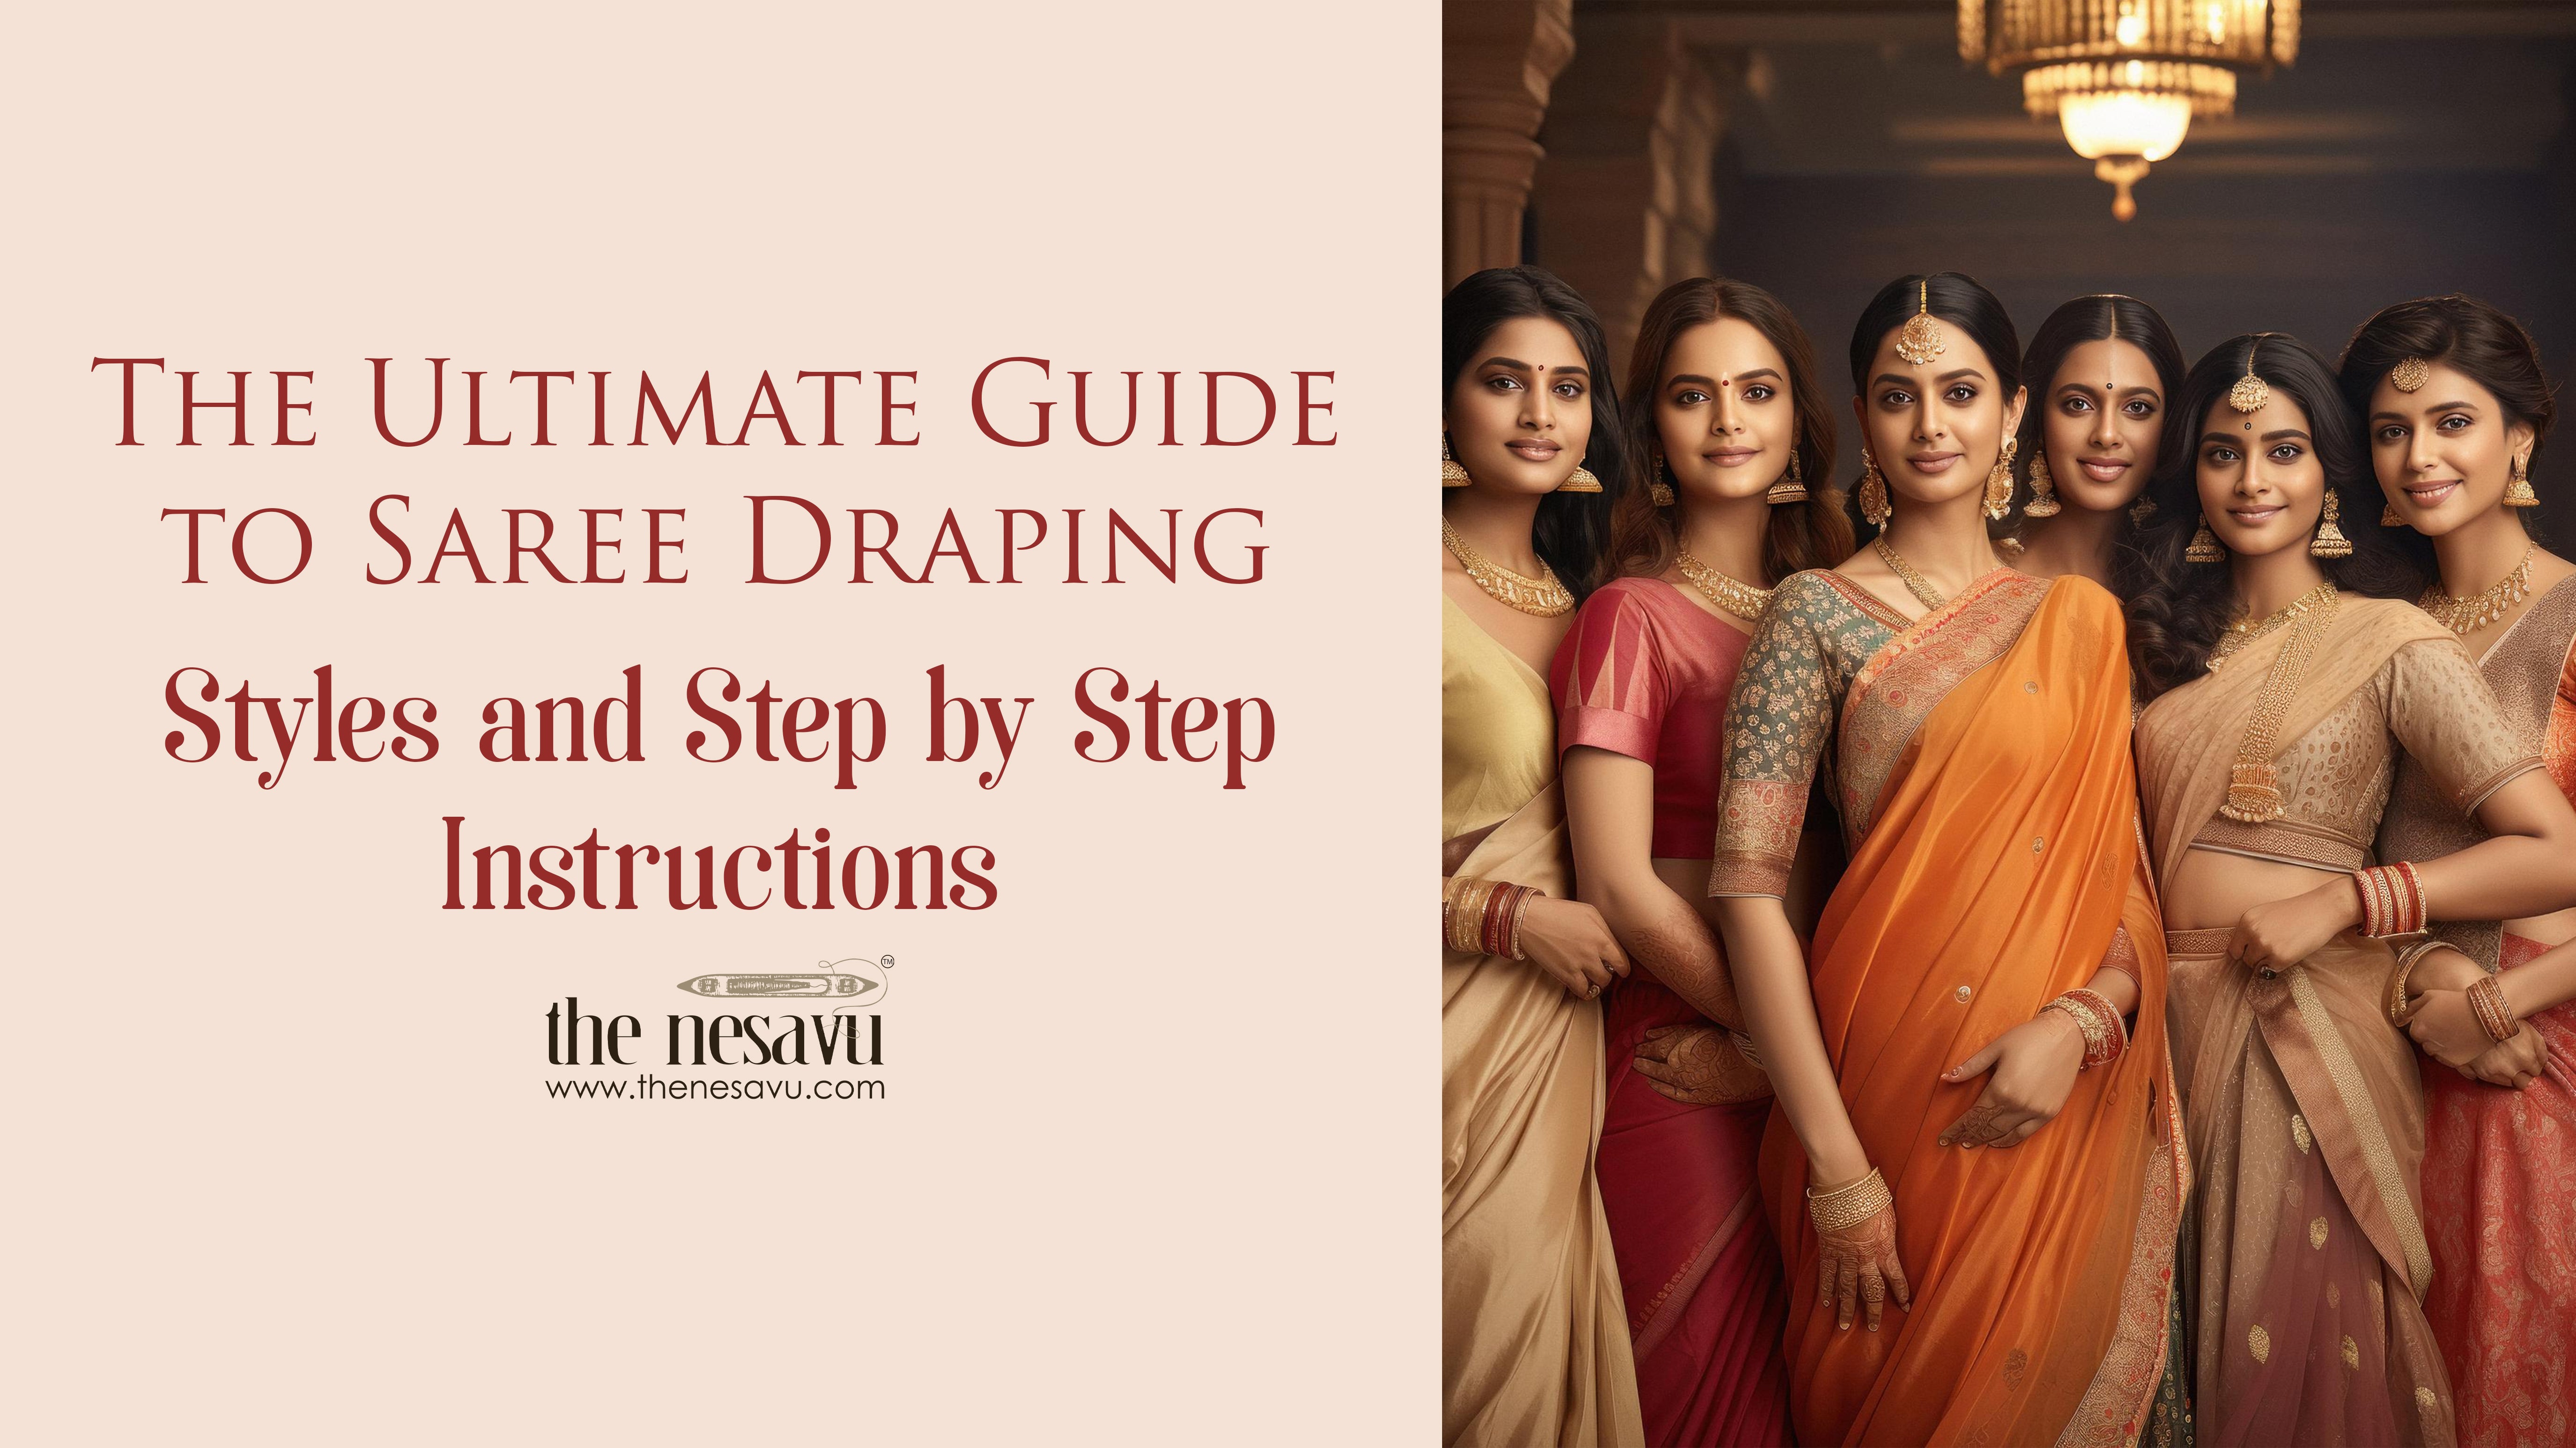 The Ultimate Guide to Saree Draping: Styles and Step-by-Step